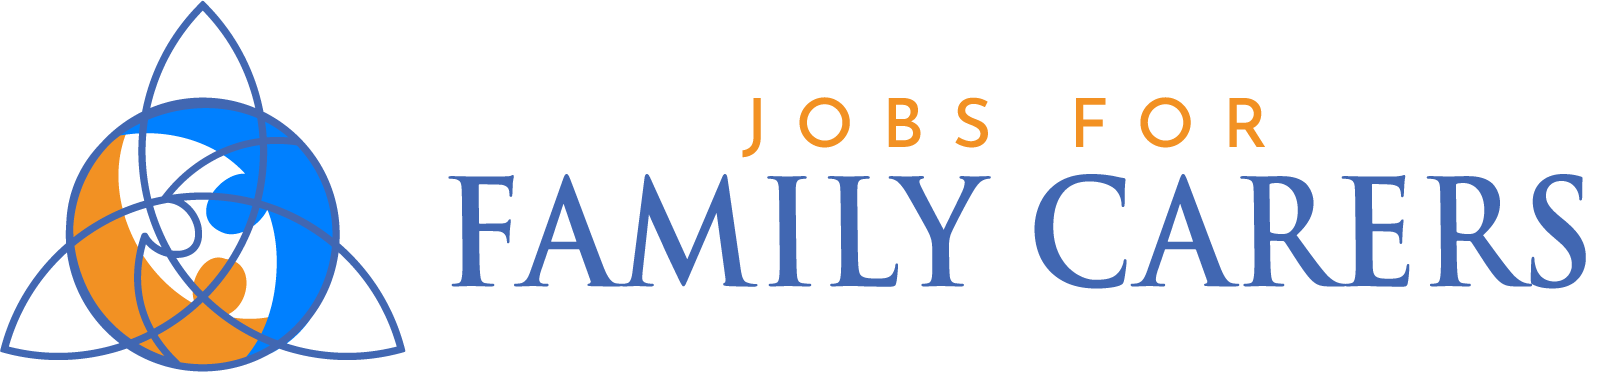 Jobs for Family Carers